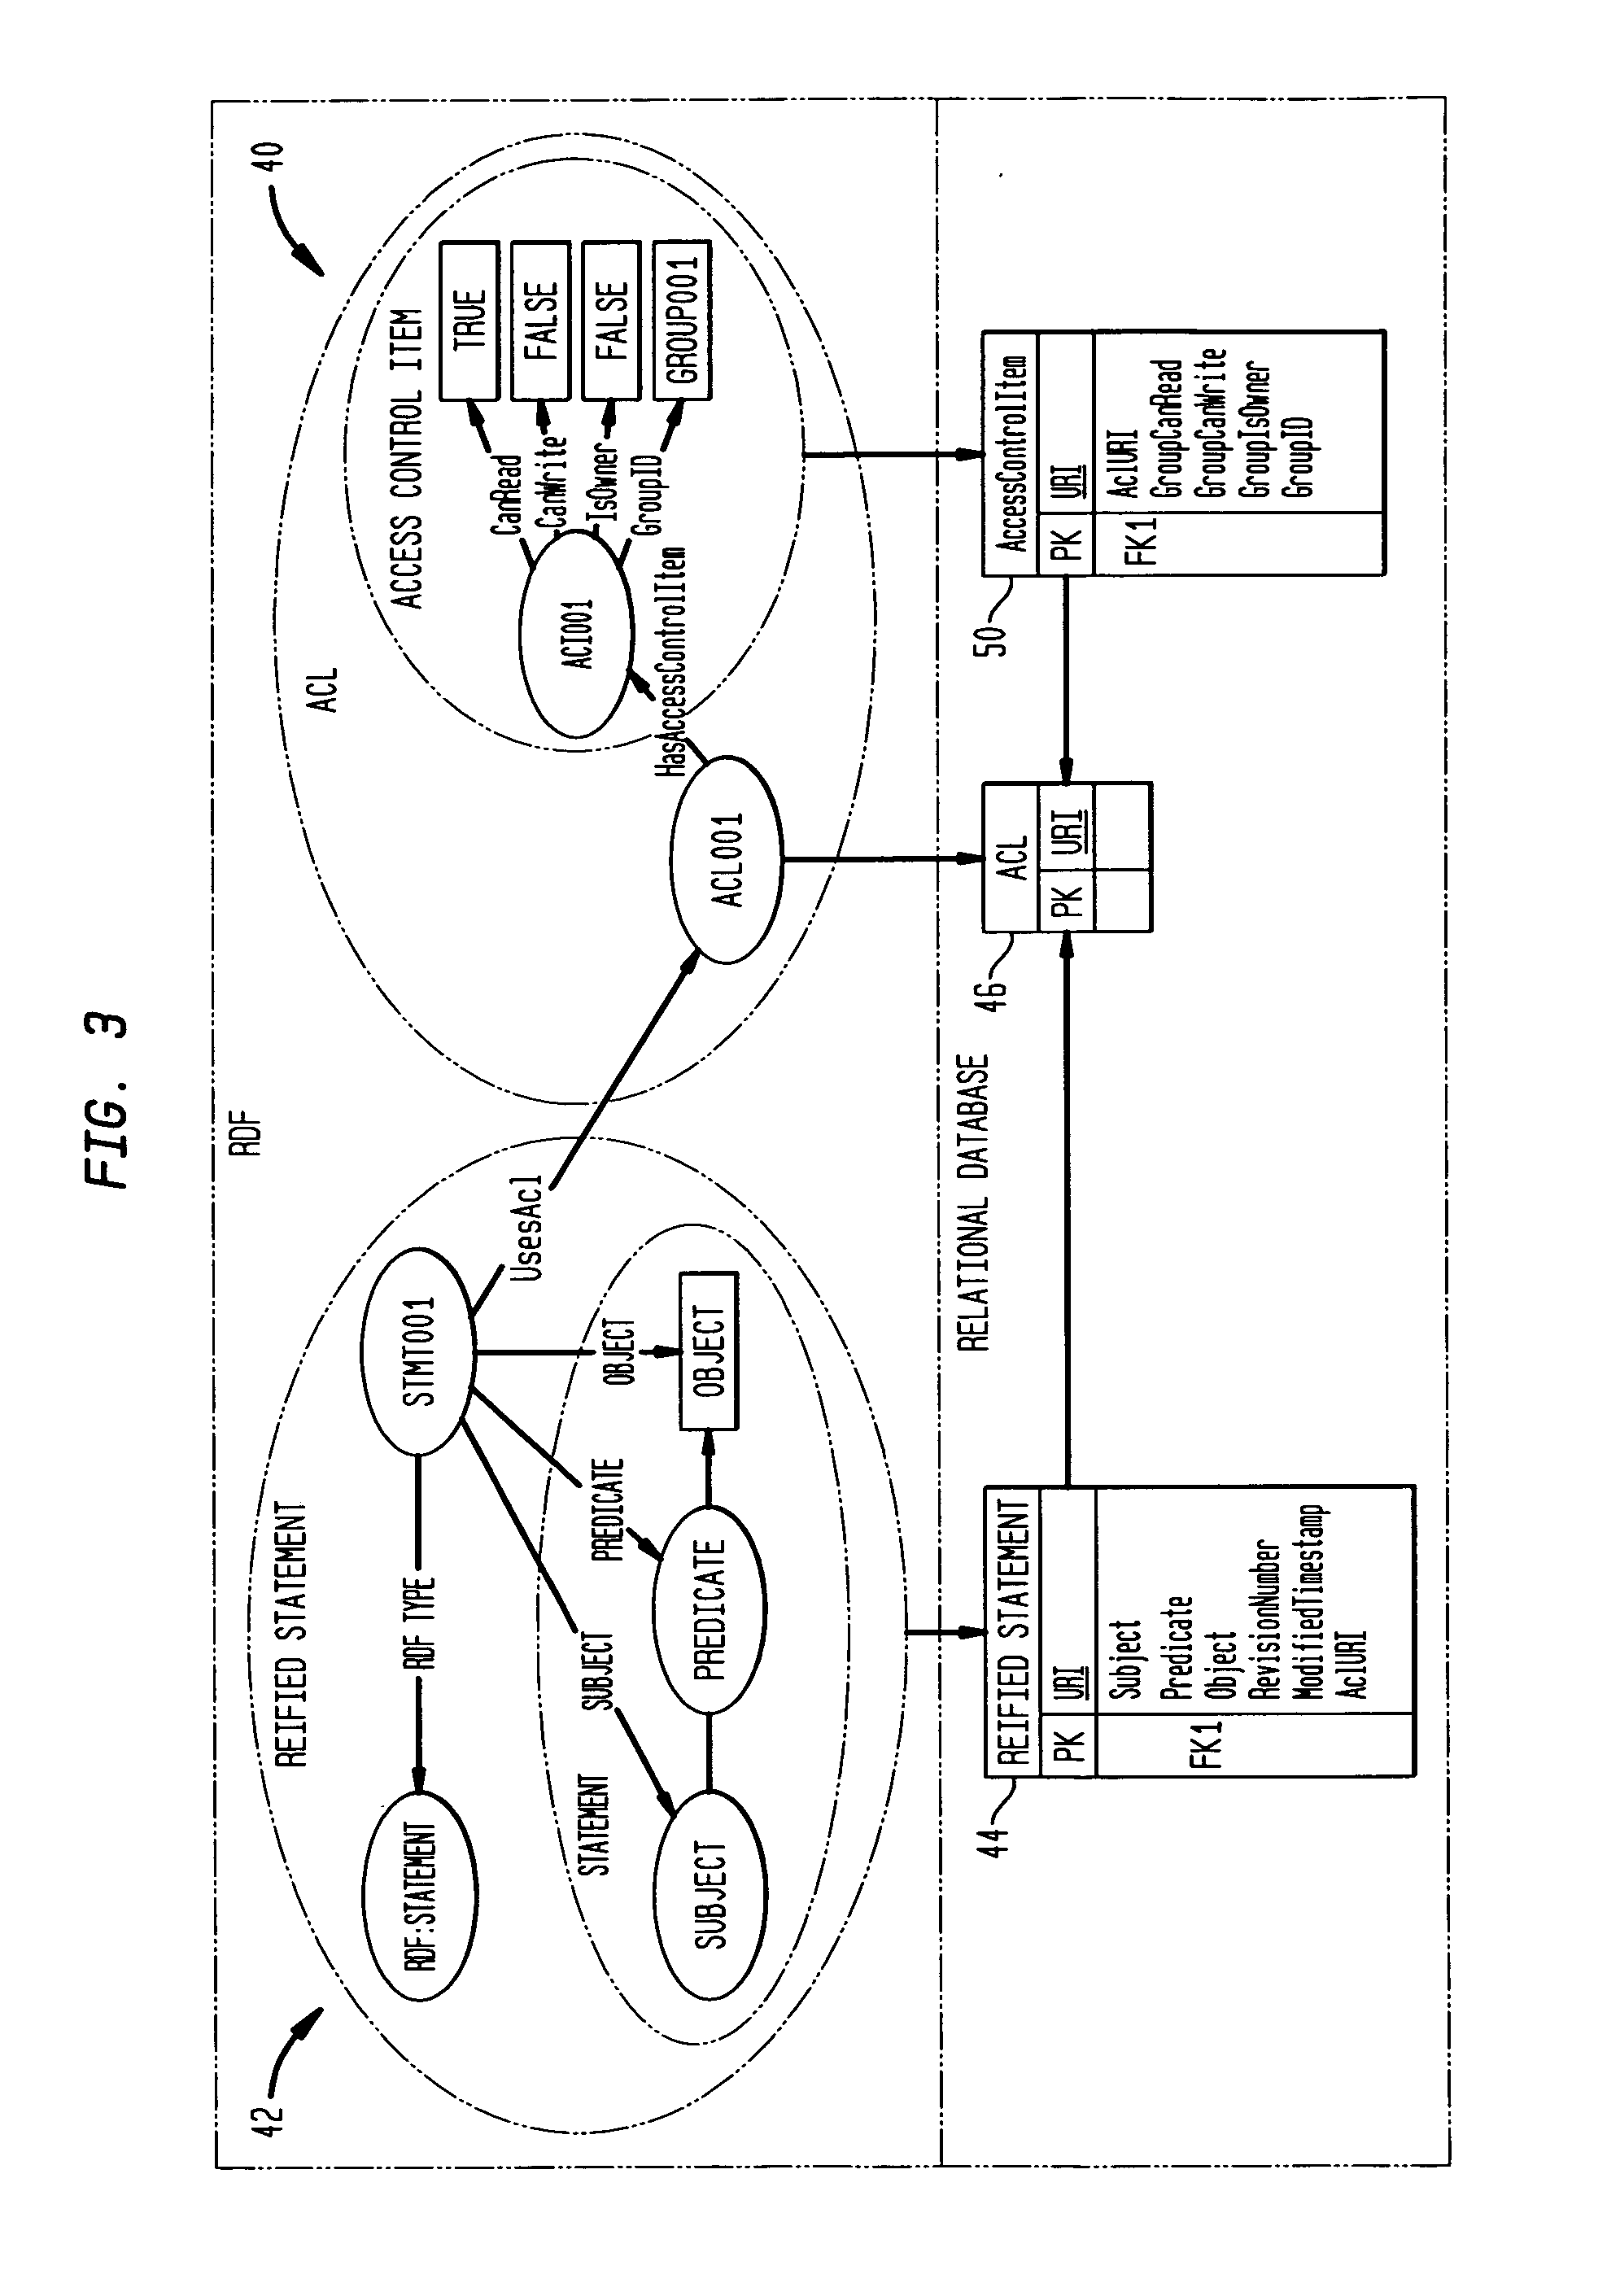 Method and system for controlling access to semantic web statements